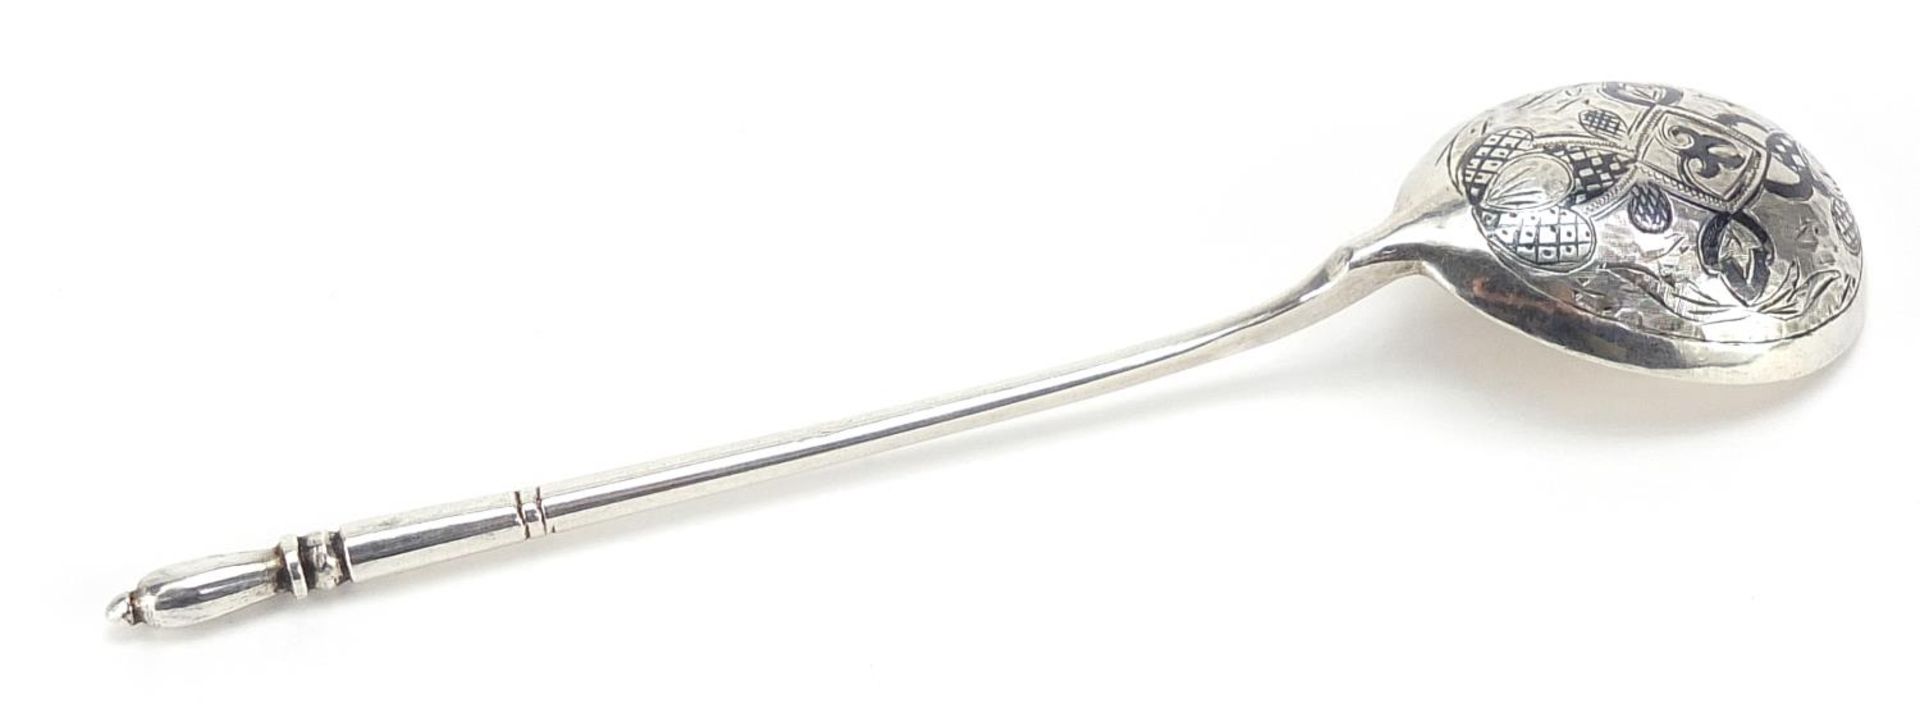 Russian silver niello work spoon, impressed Russian marks, 13.5cm in length, 20.4g - Image 2 of 3